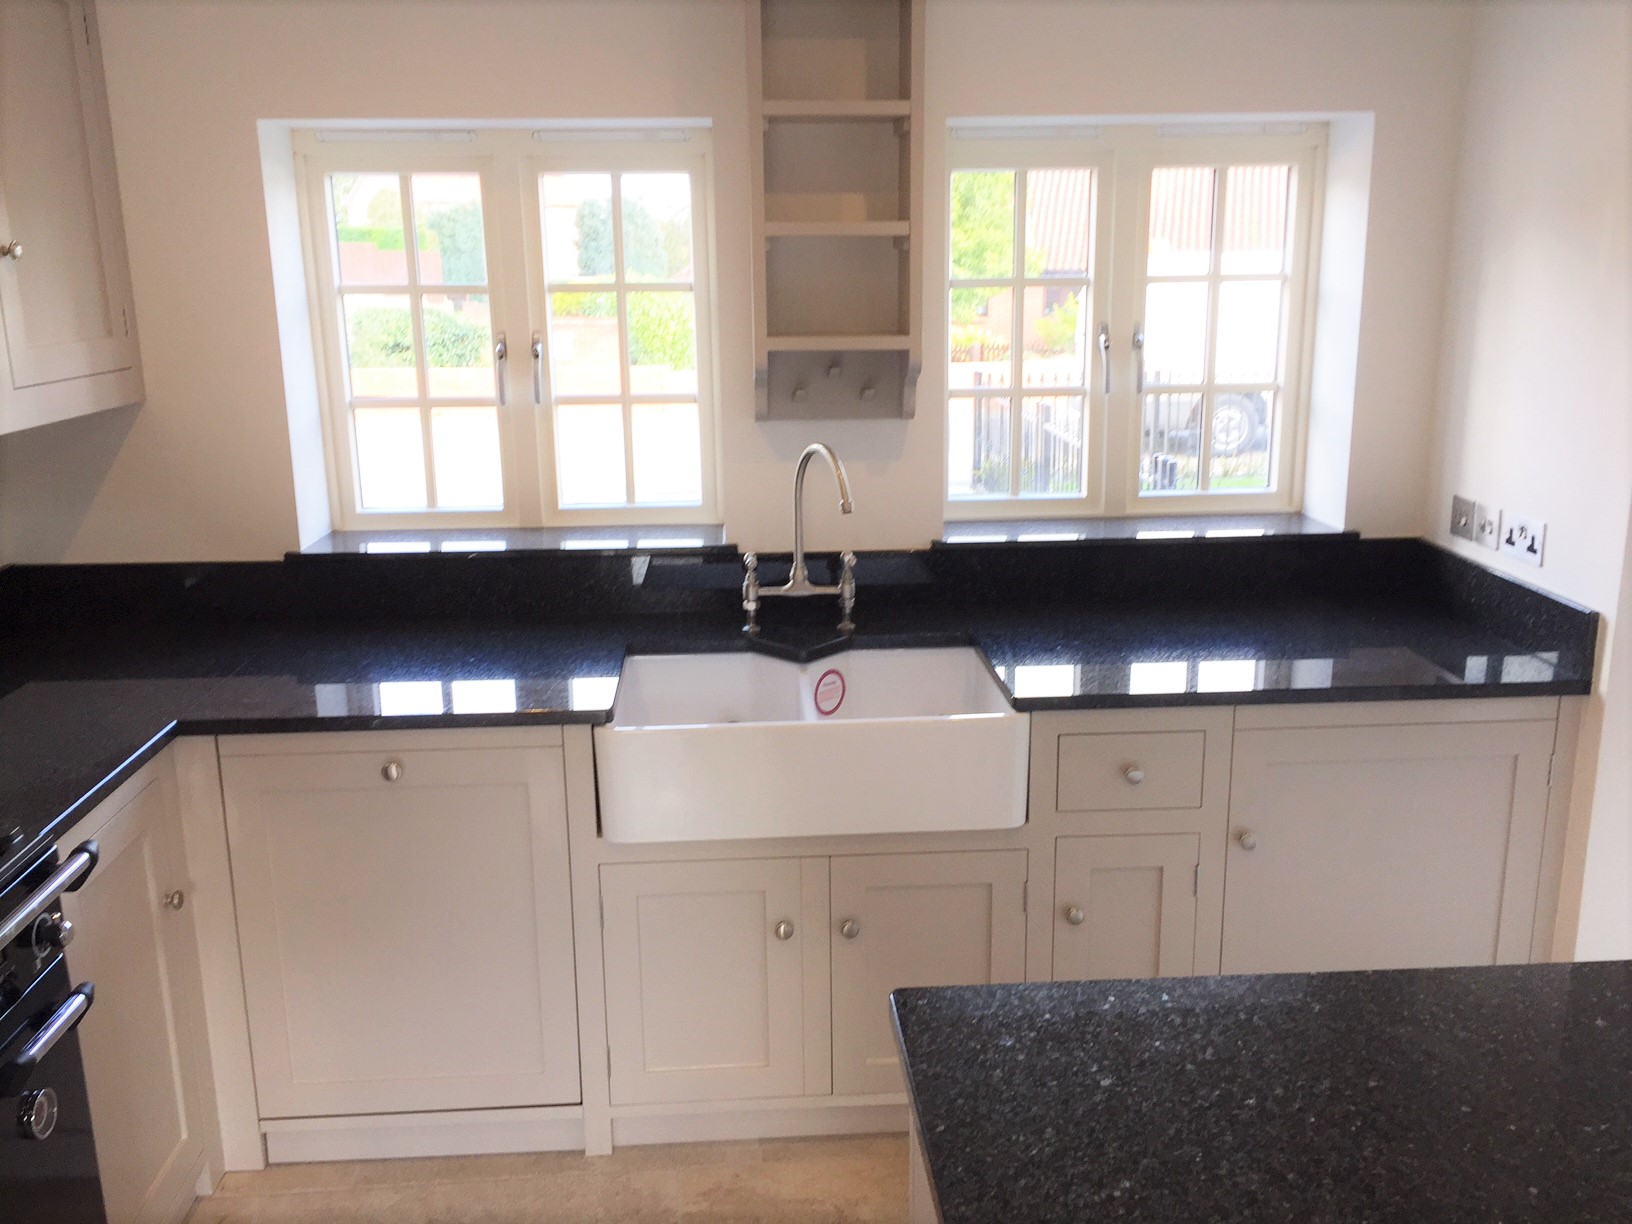 Fully bespoke, hand built from solid wood,shaker style kitchen painted in Farrow & Ball Elephants Breath